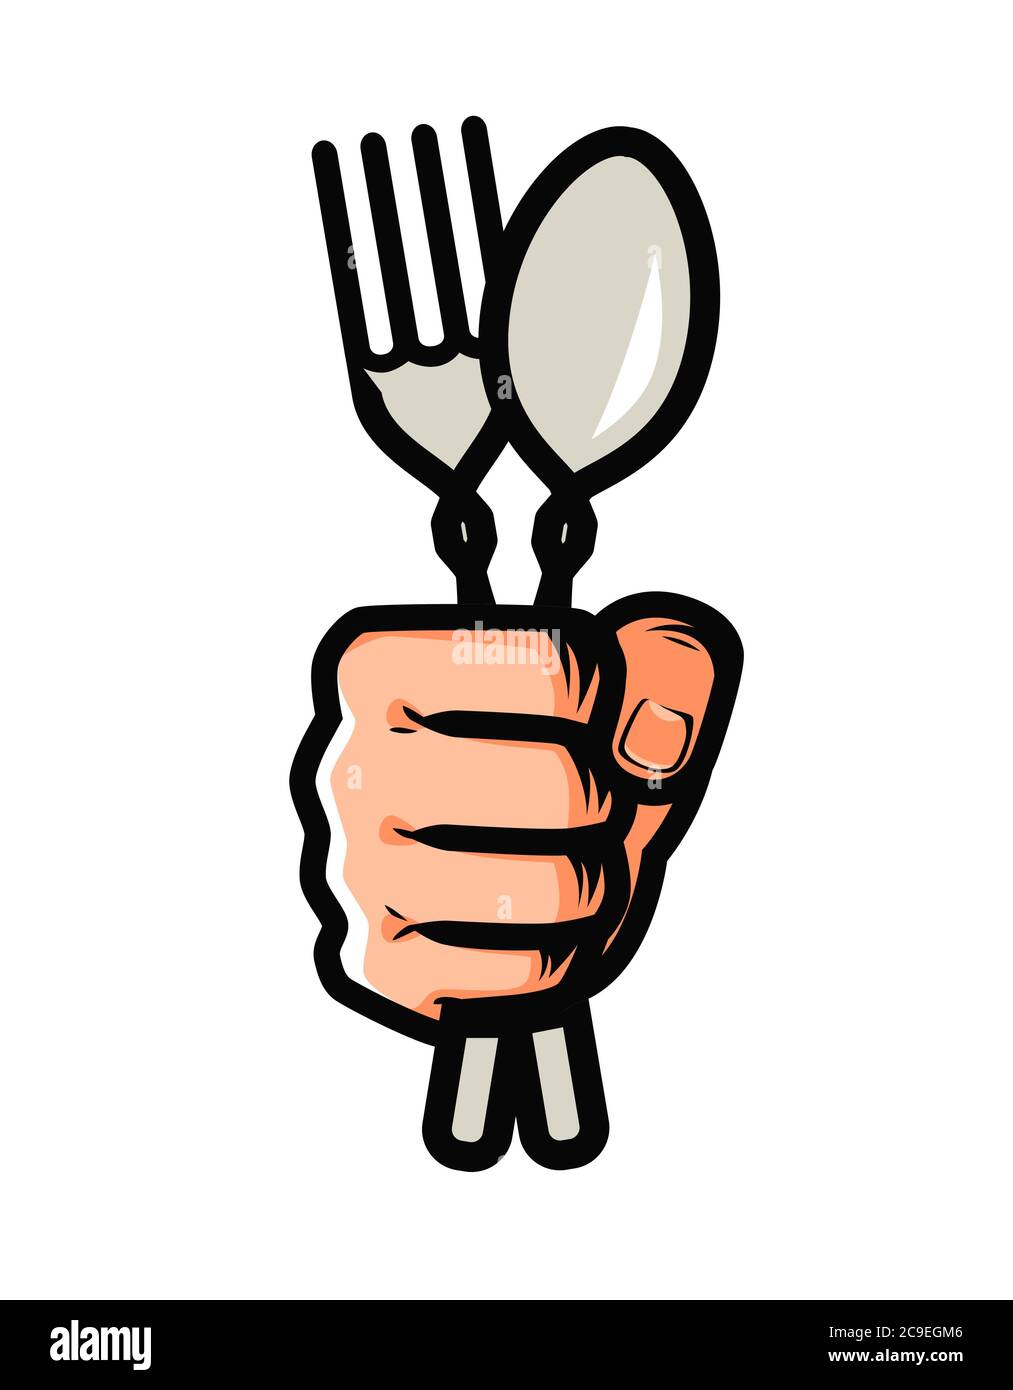 Fork and spoon in hand symbol. Cooking, restaurant, food concept Stock Vector